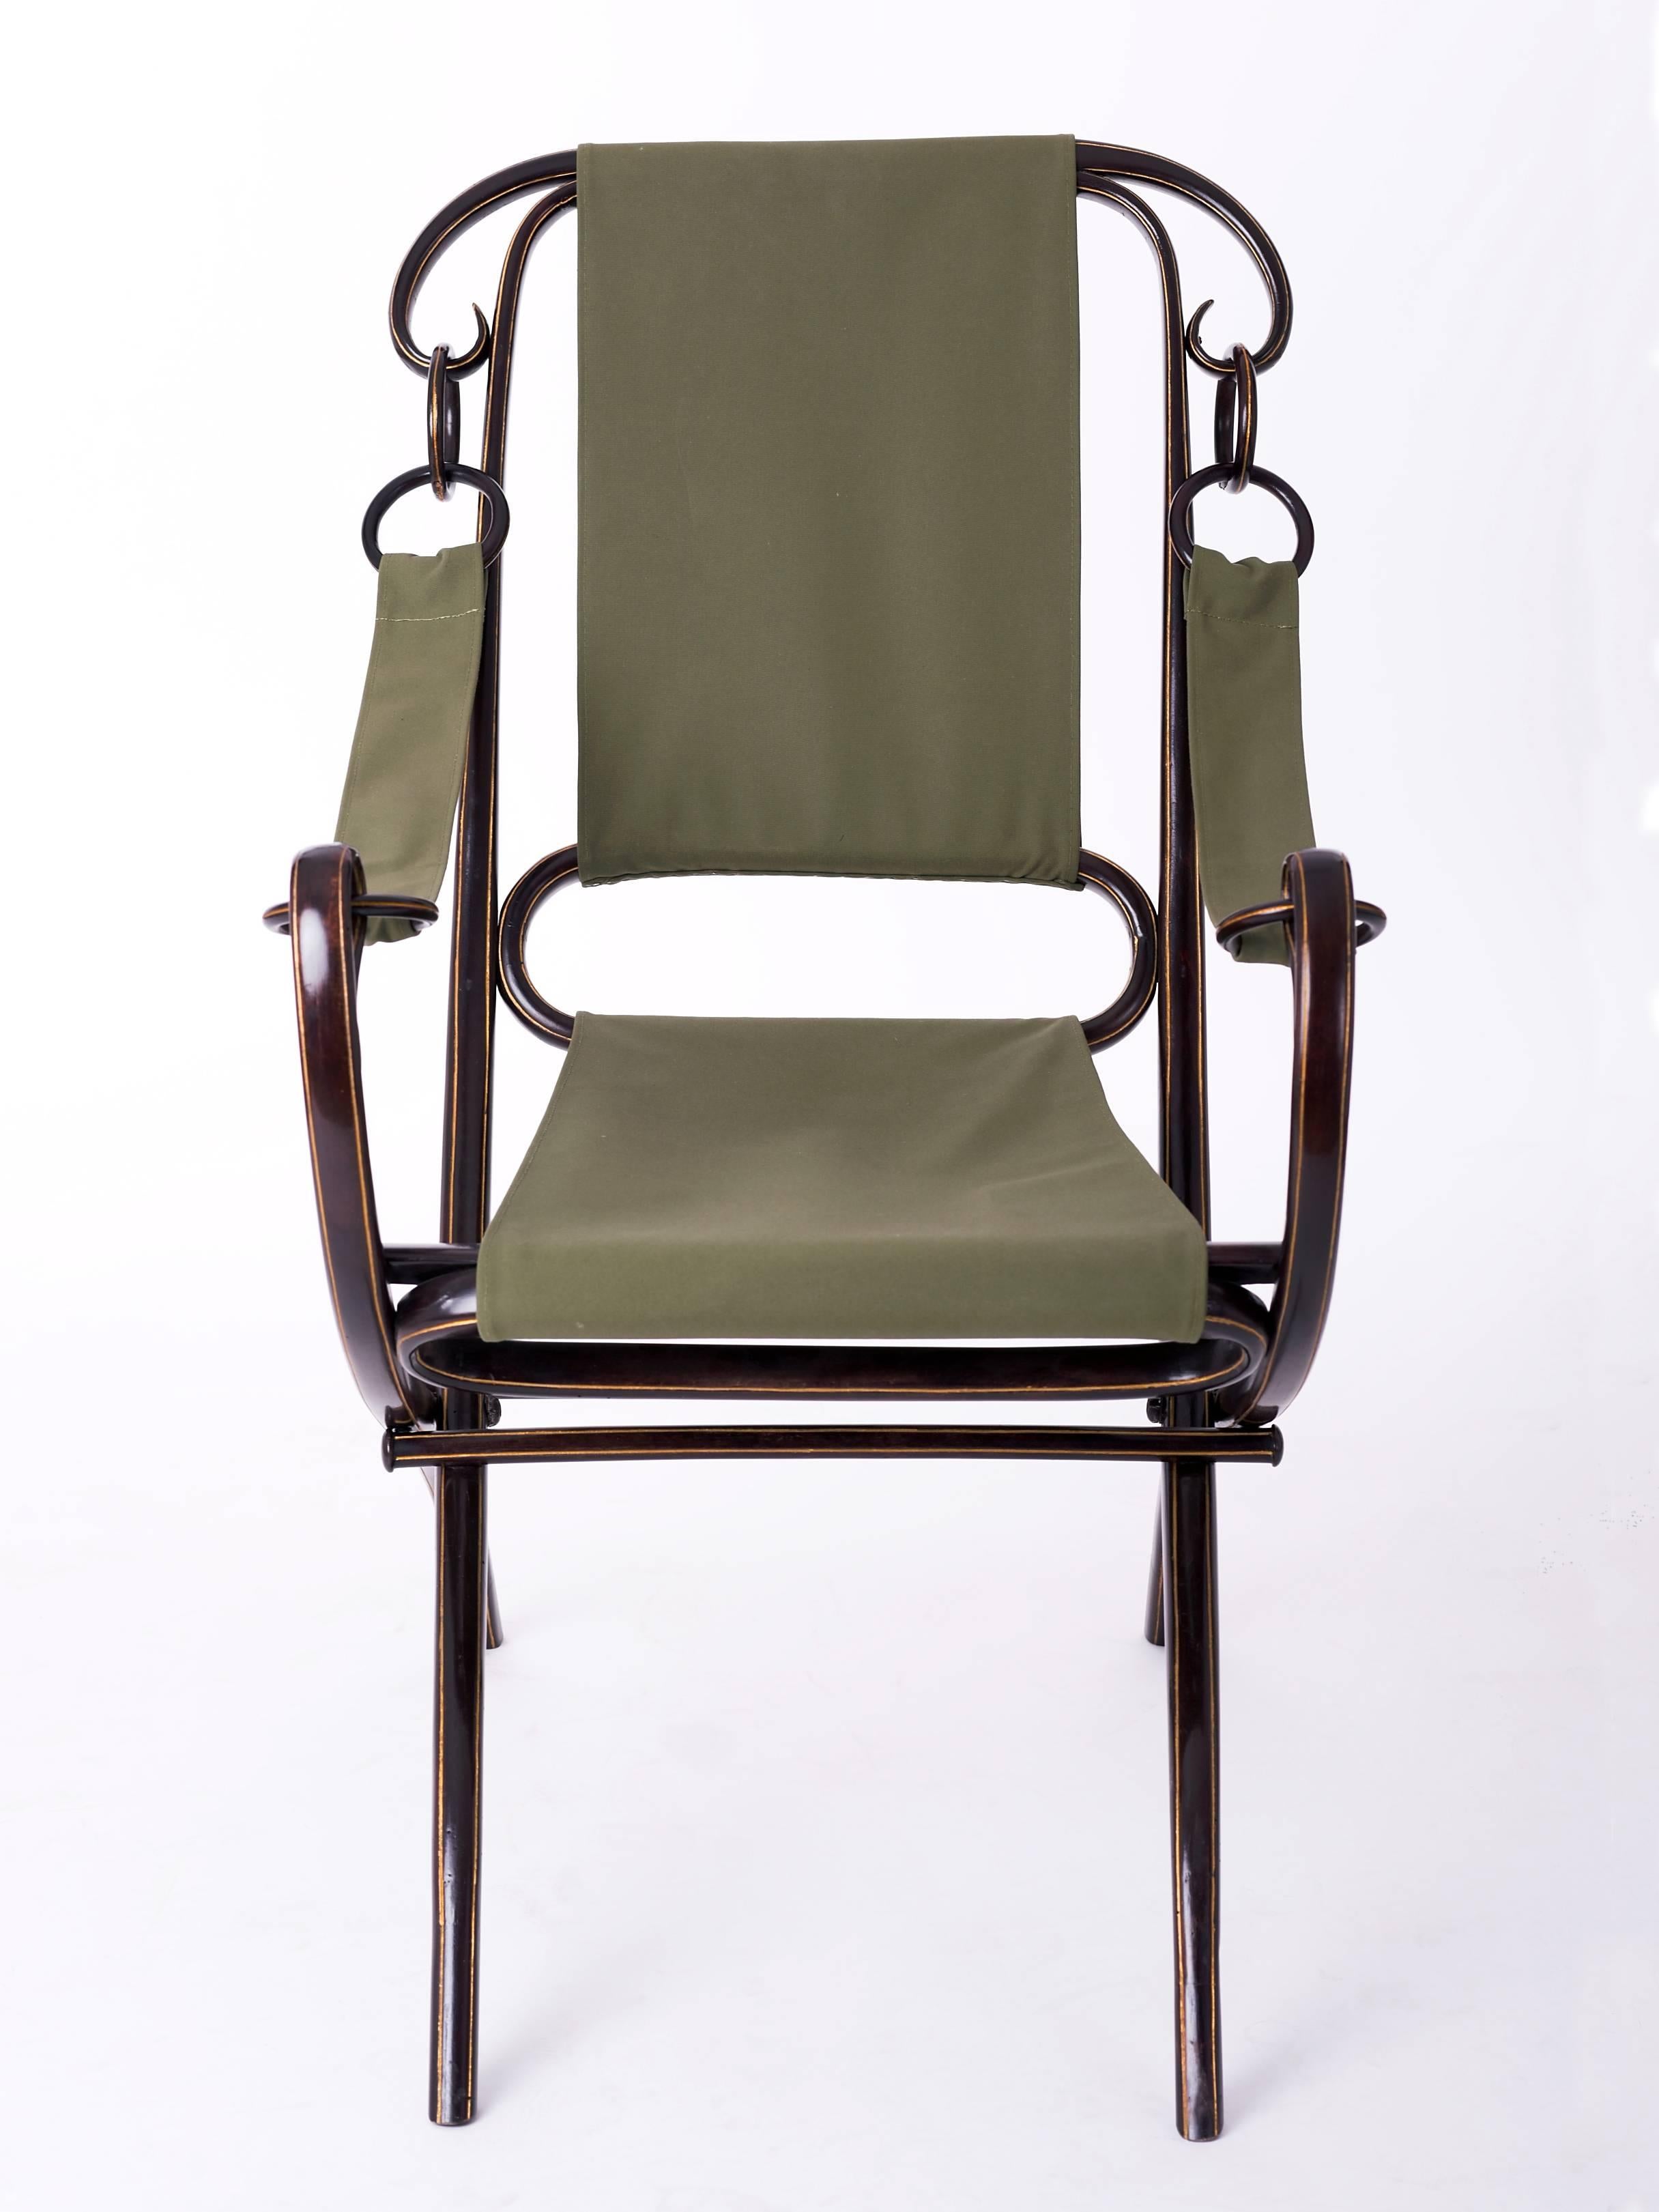 Folding armchair from Thonet No.2 
designed before 1885.
Beech, new dark brown stained and with platinum gold lines decor.
New green fabric cover.

We offer Shop To Door delivery worldwide. Please ask for a quote.
   